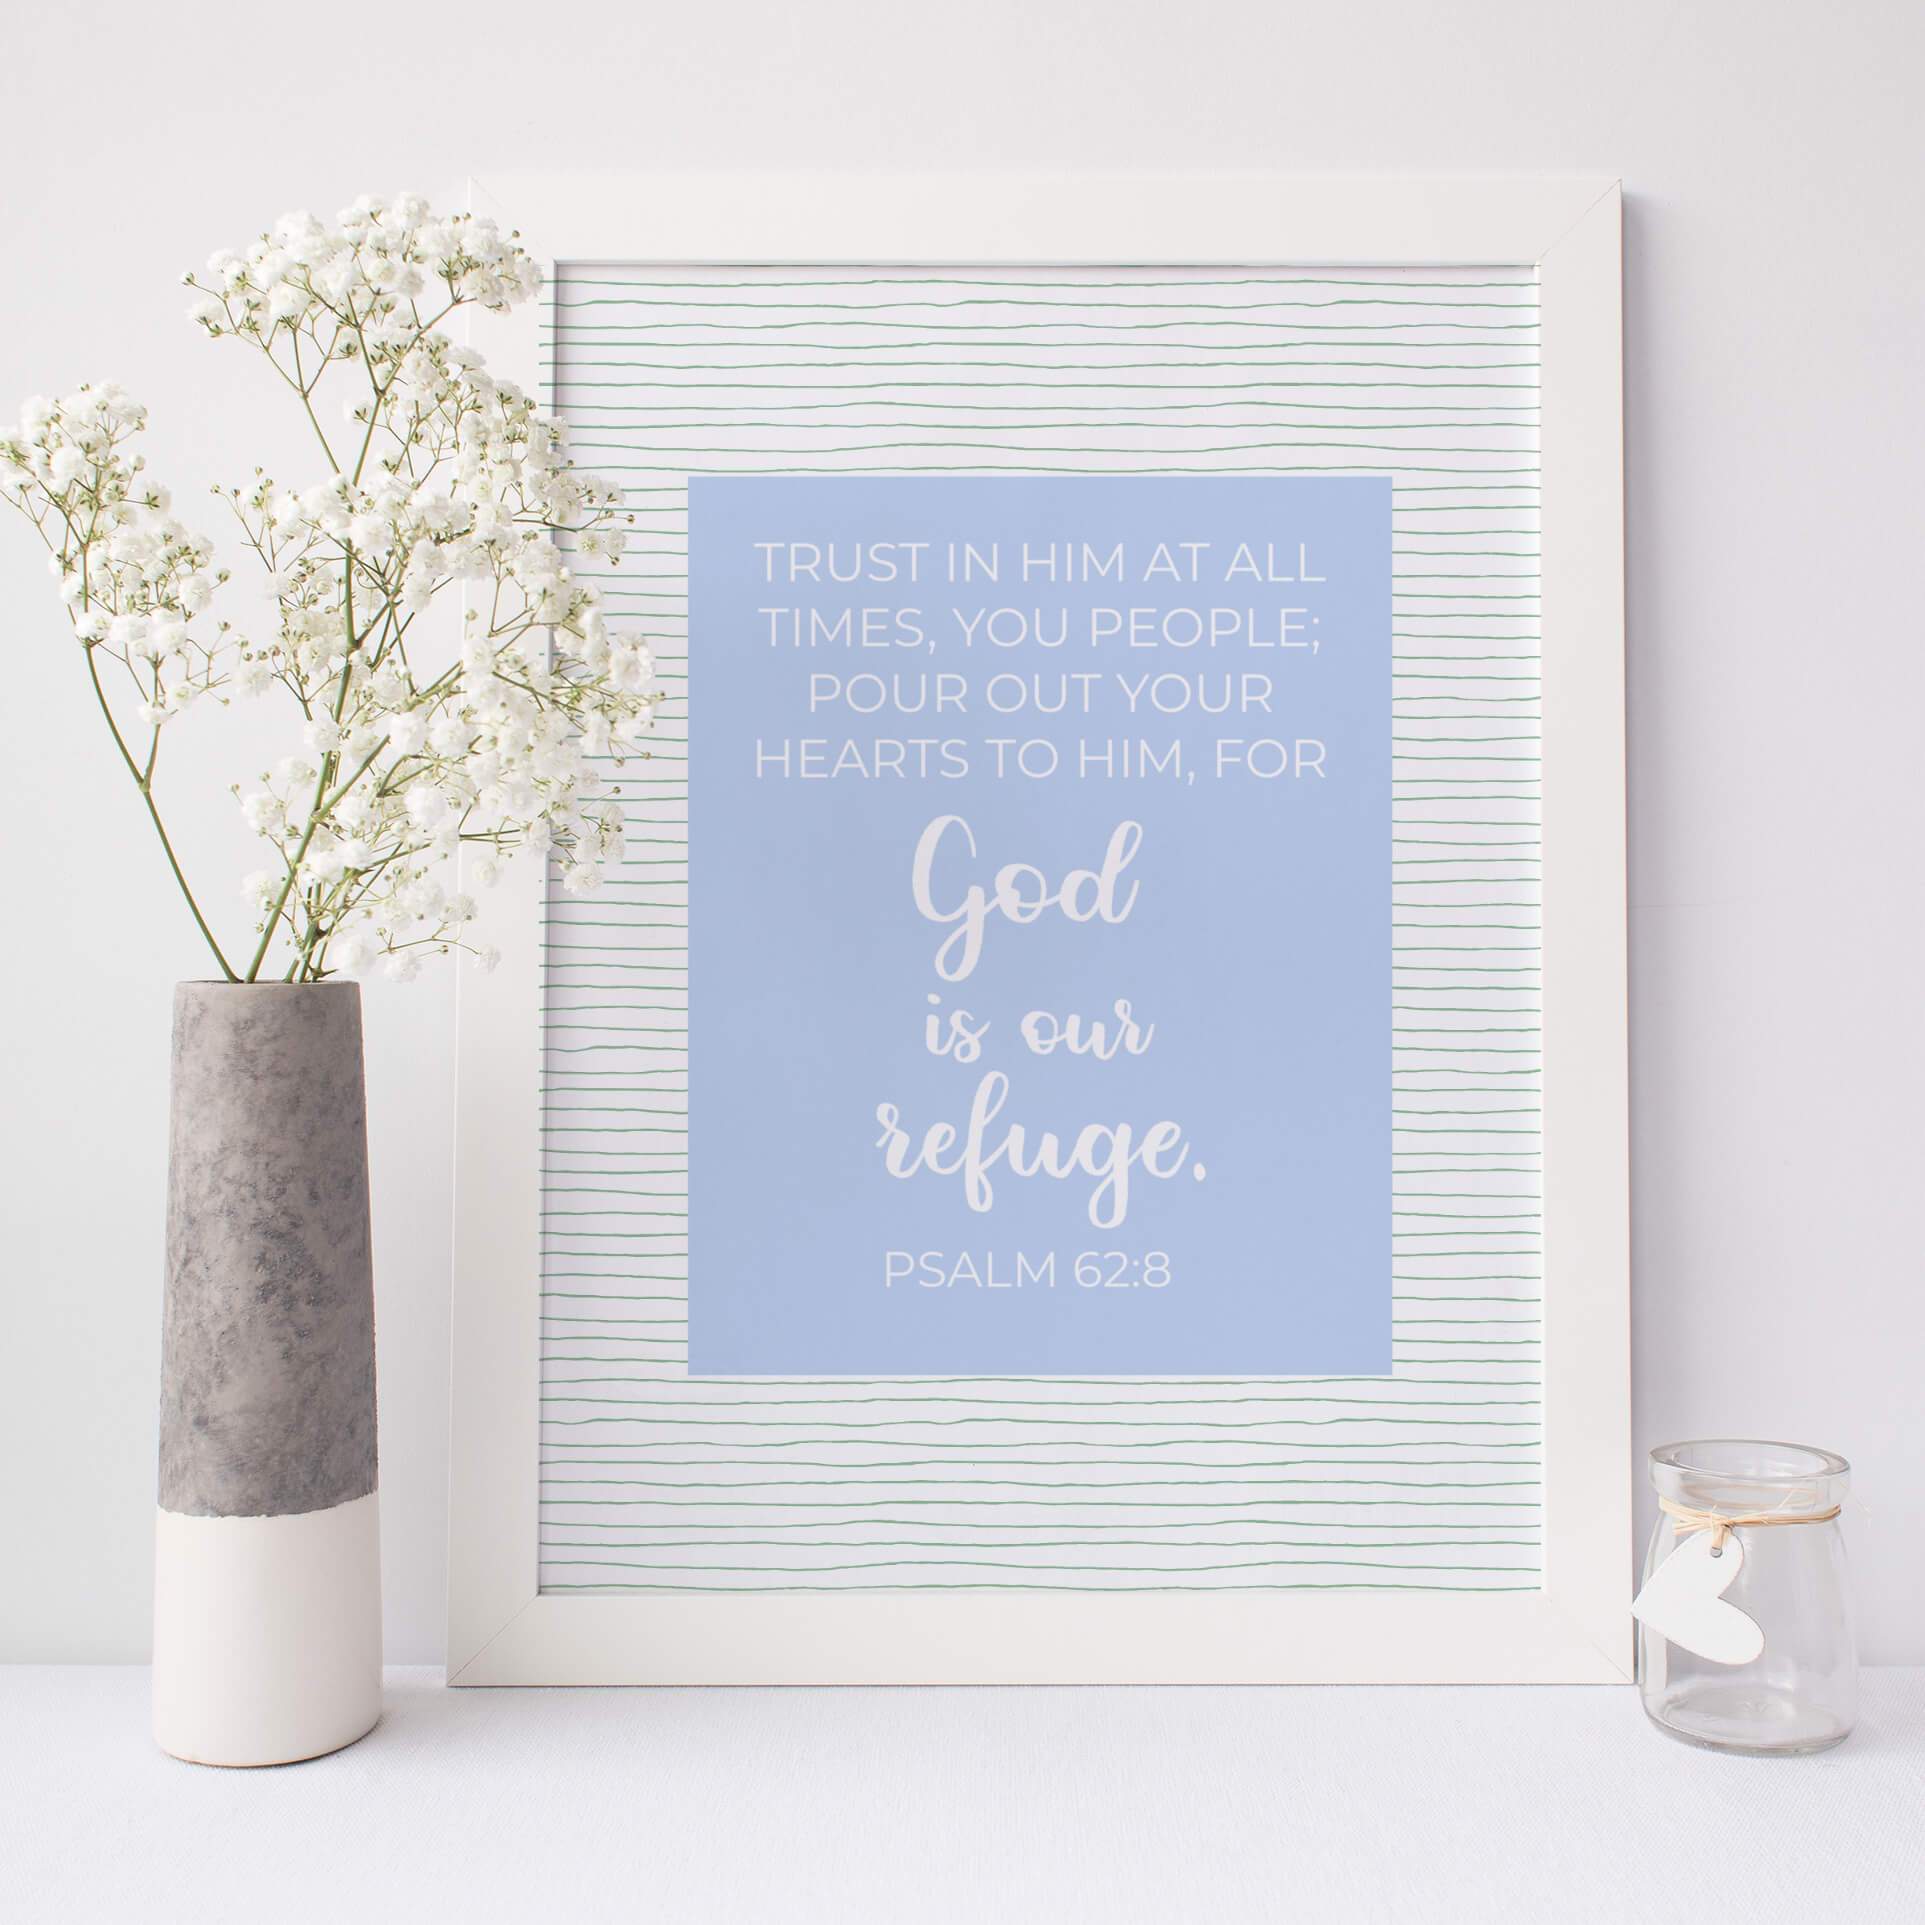 Pour Out Your Hearts To Him Print - Psalm 62:8 - By the Brook Creations